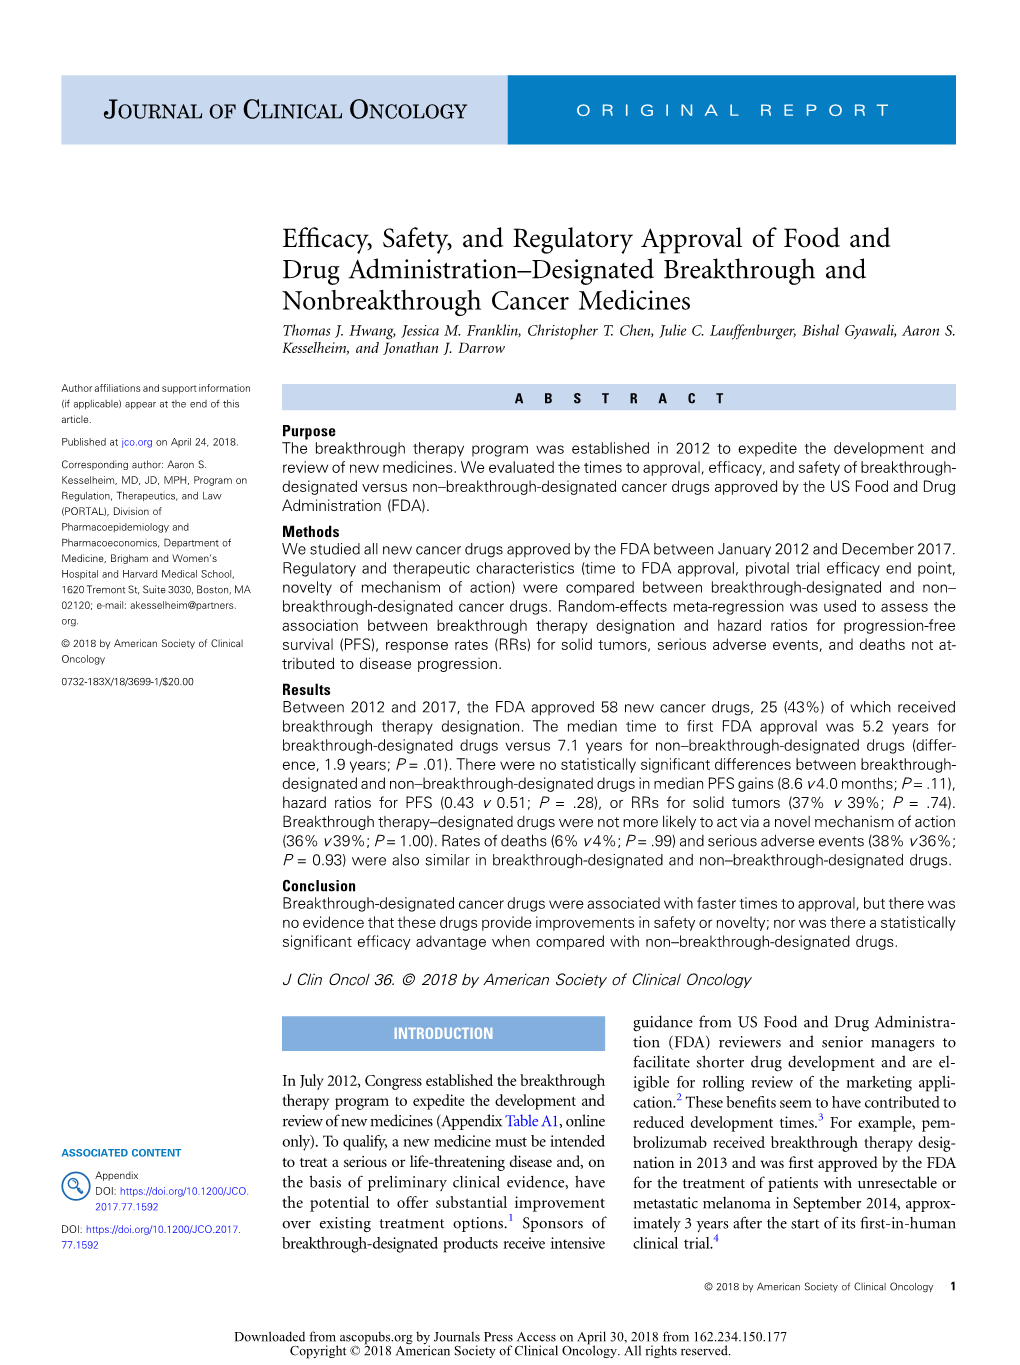 Efficacy, Safety, and Regulatory Approval of Food and Drug Administration–Designated Breakthrough and Nonbreakthrough Cancer M